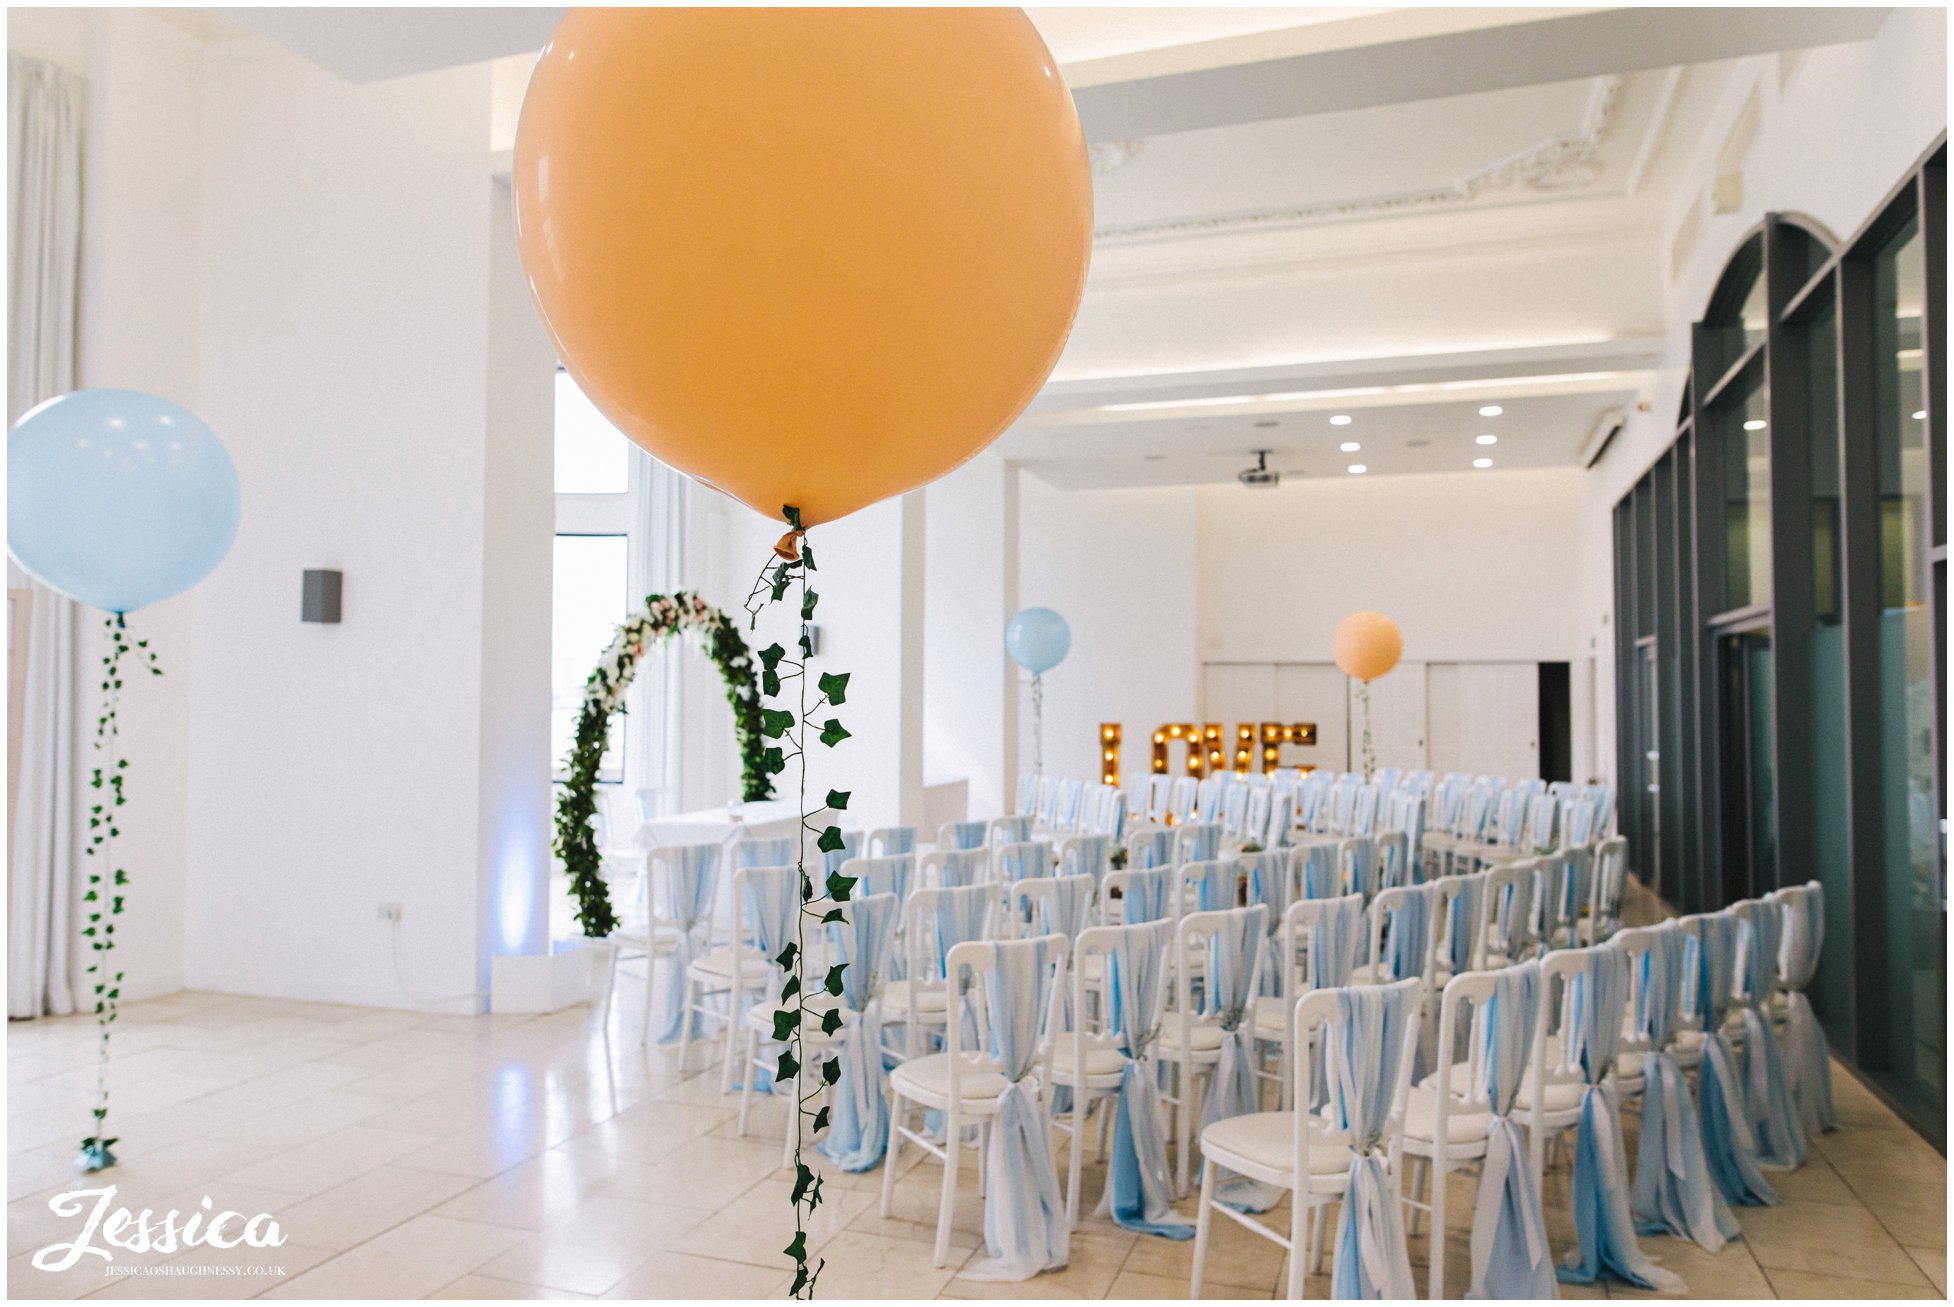 giant balloons for the wedding at the liver building